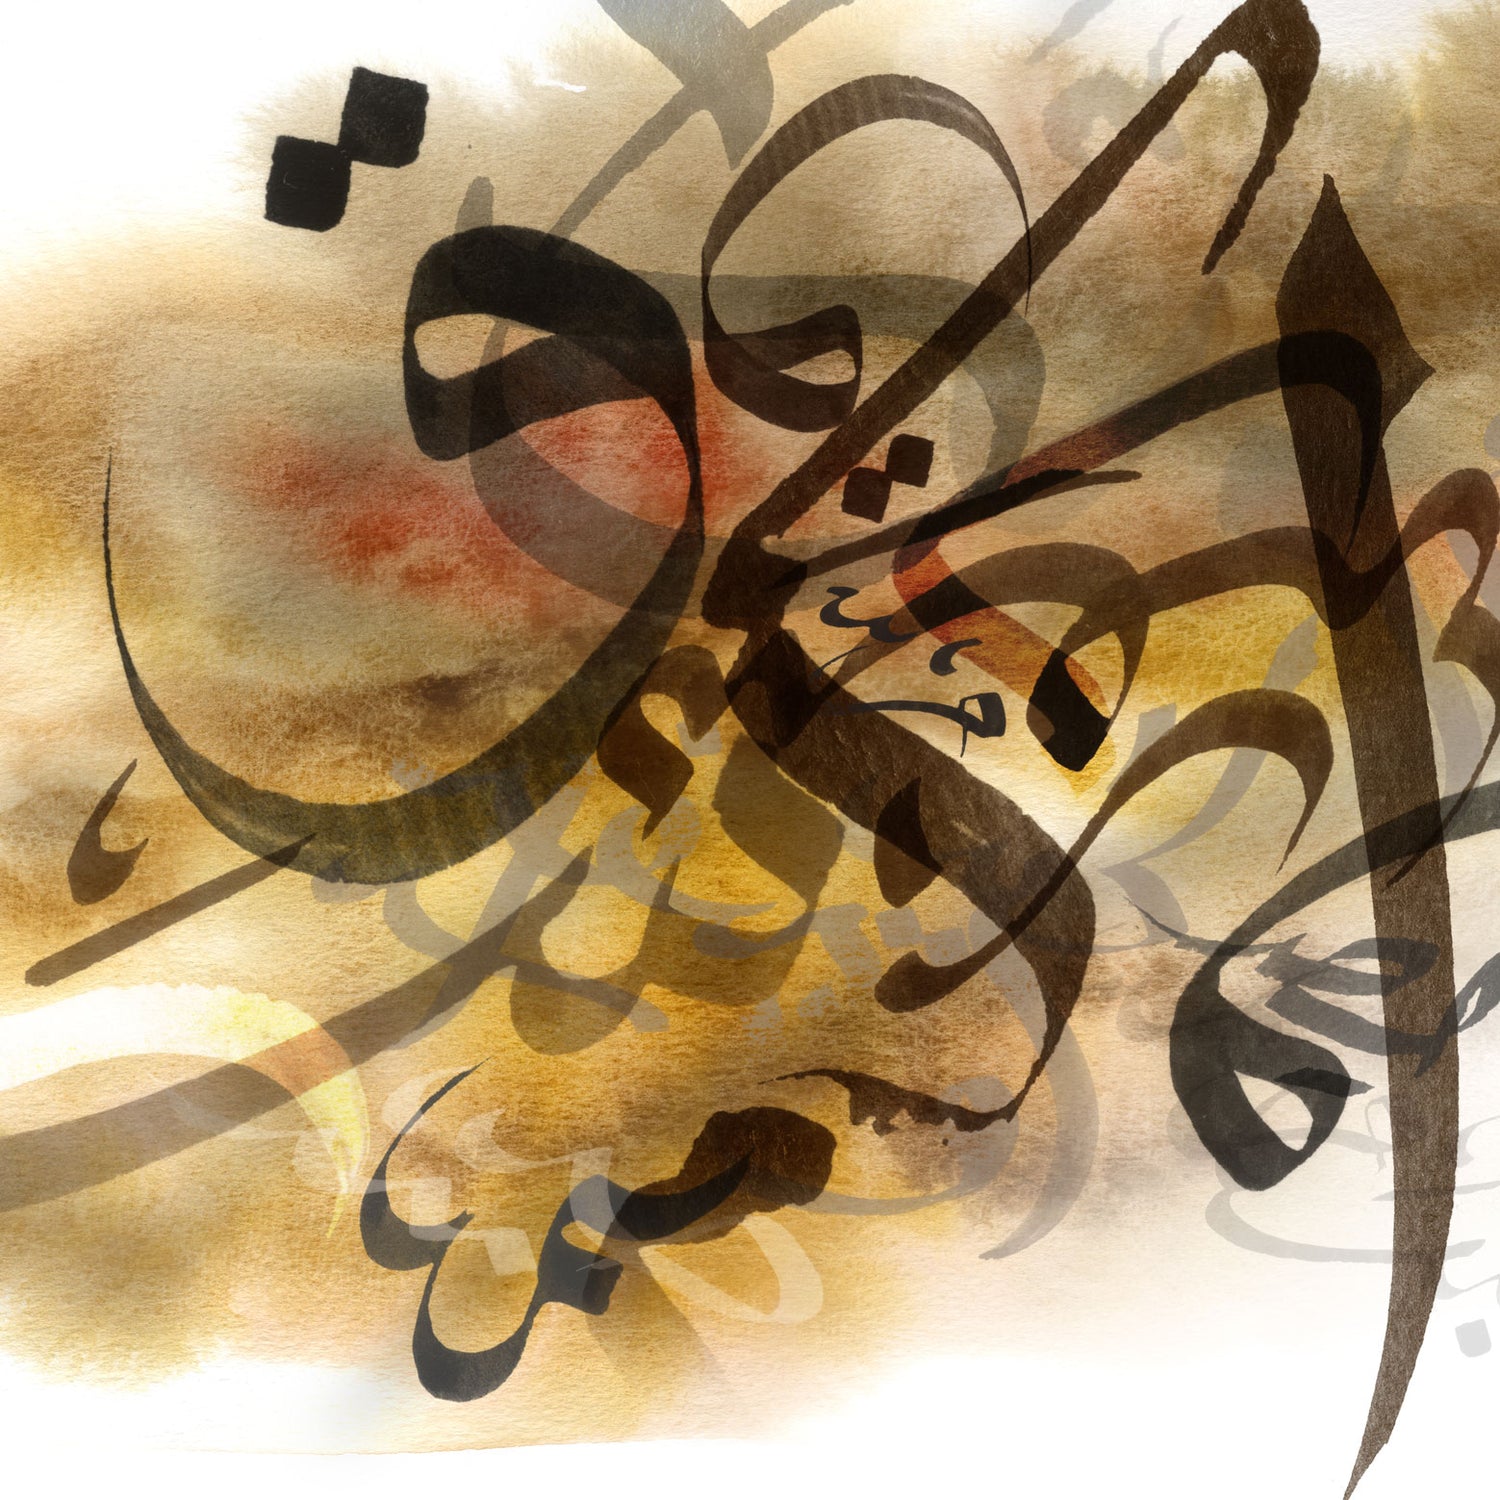 Contemporary Arabic abstract calligraphy art by Helen Abbas